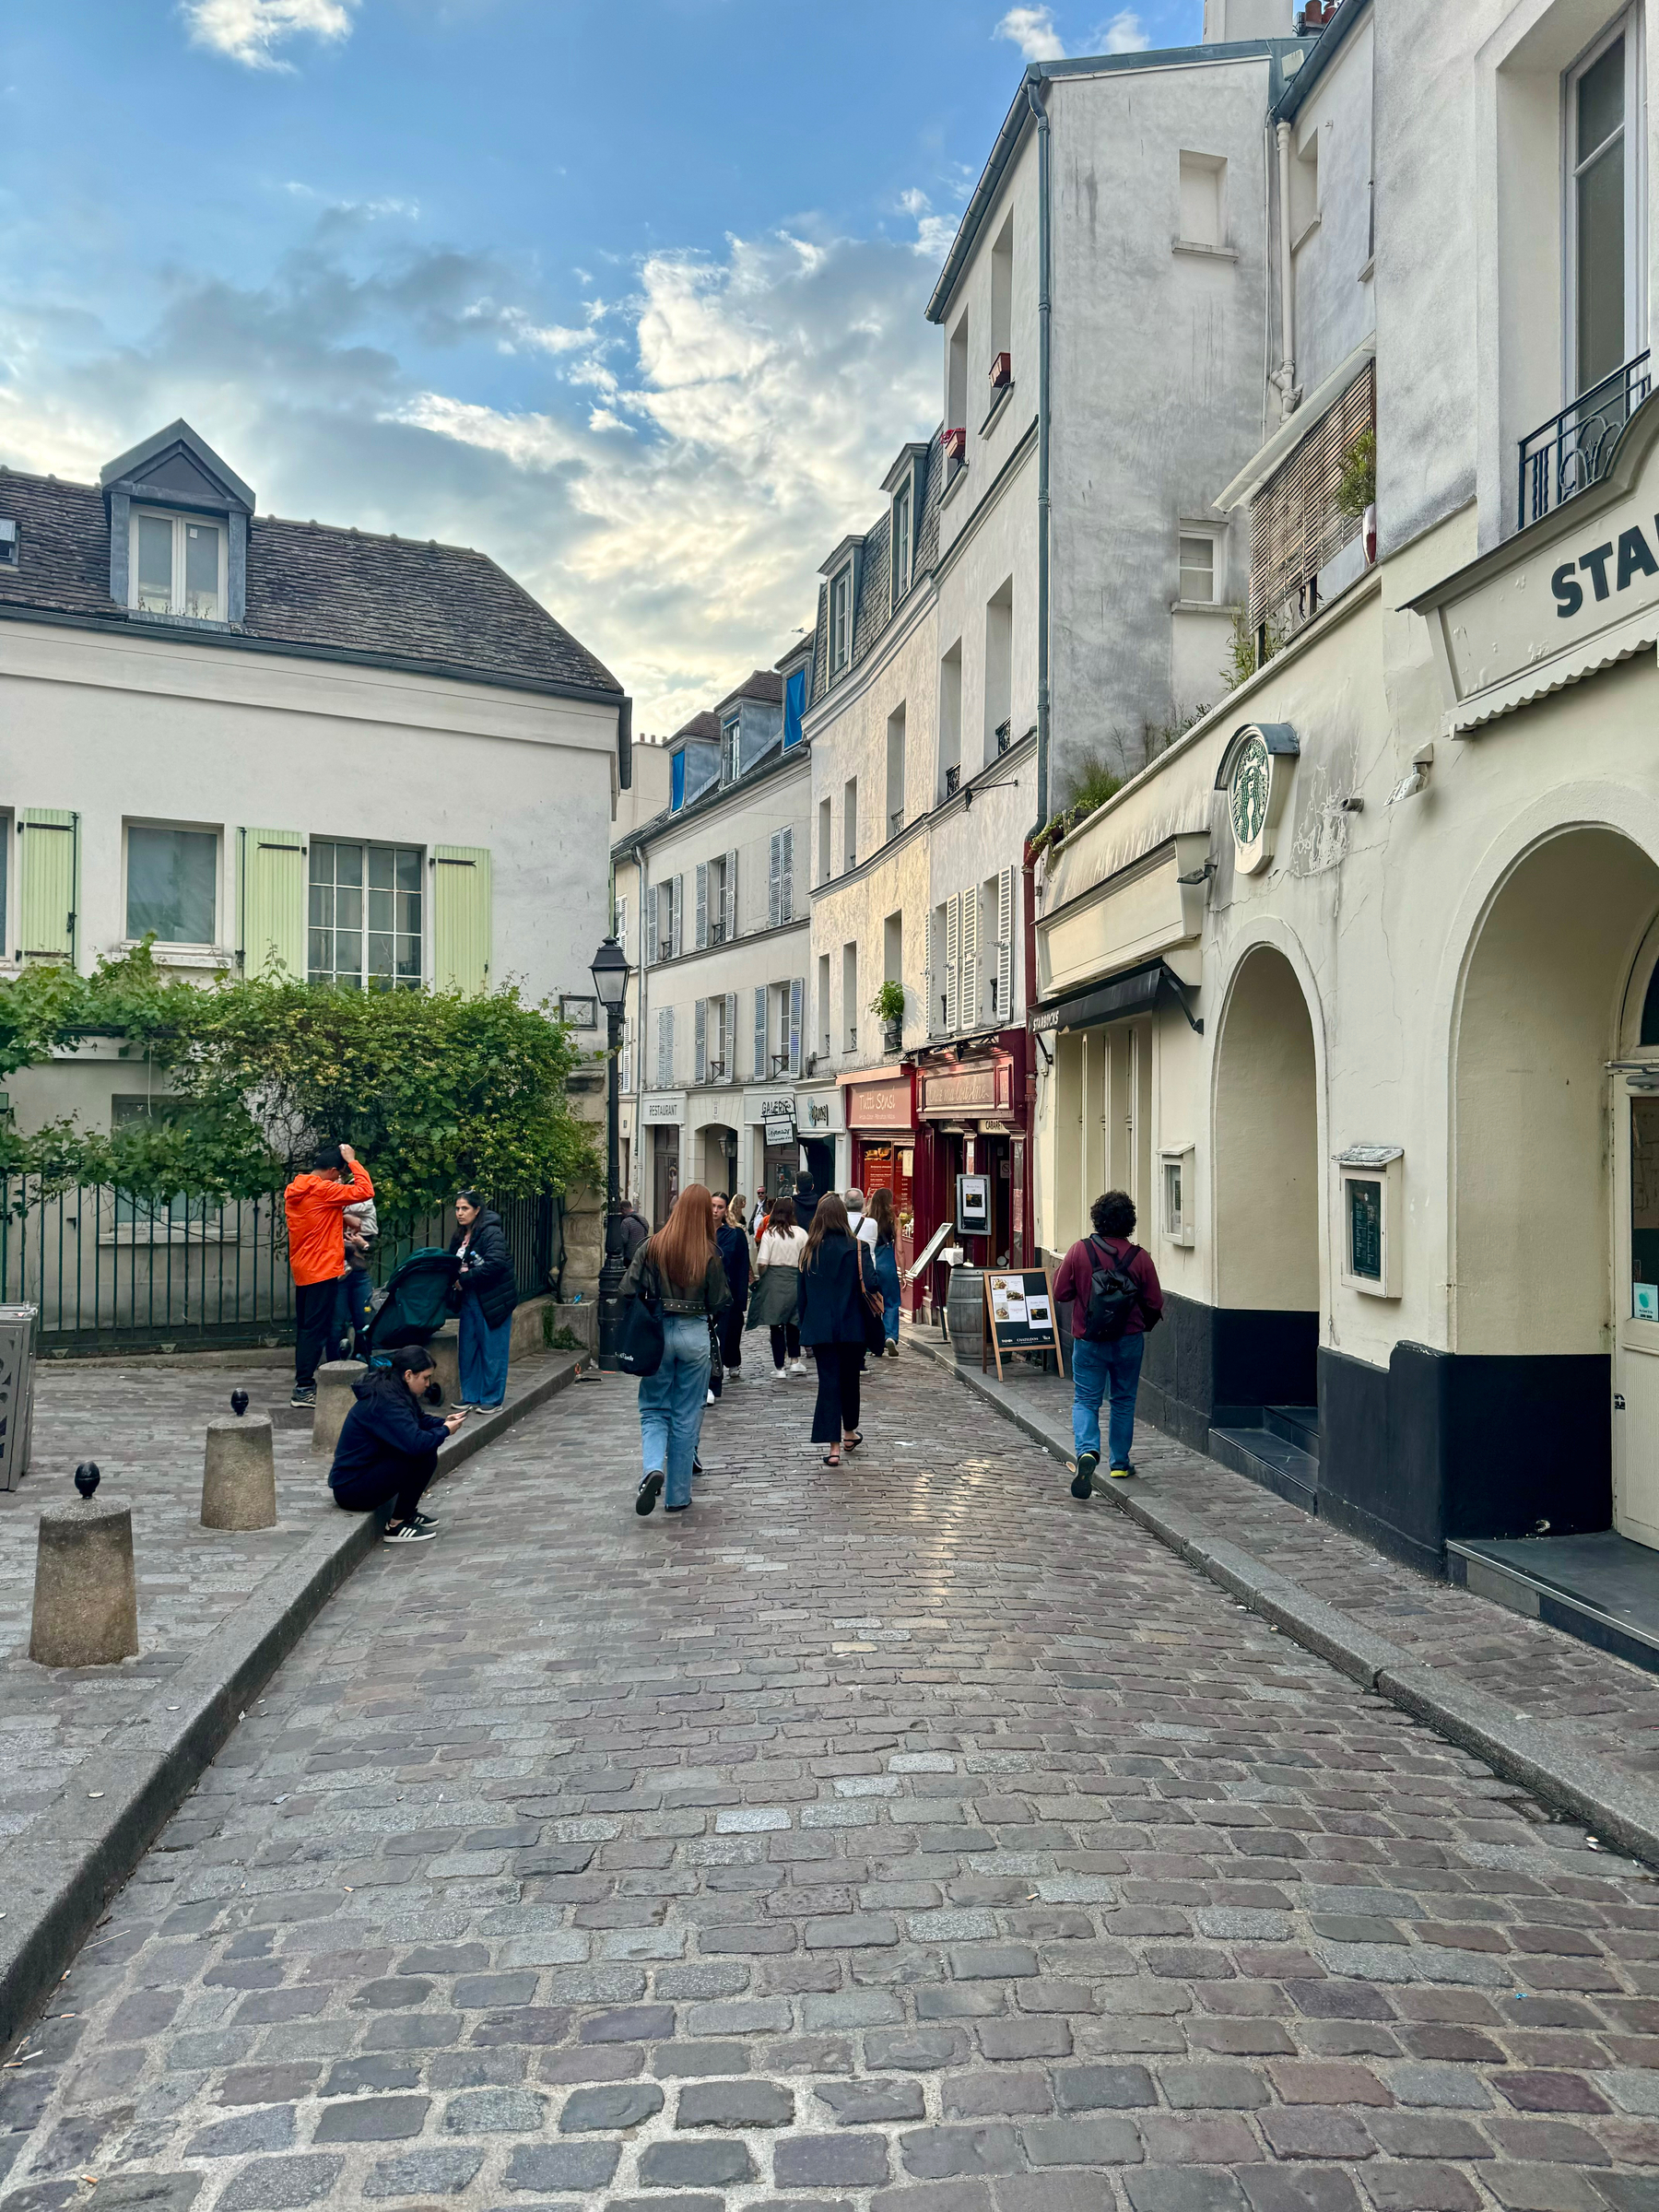 A cobblestone street in a quaint city quarter with pedestrians walking and some people taking photographs. Classic European buildings line the street, and there is a “Starbucks Coffee” sign on the right side.